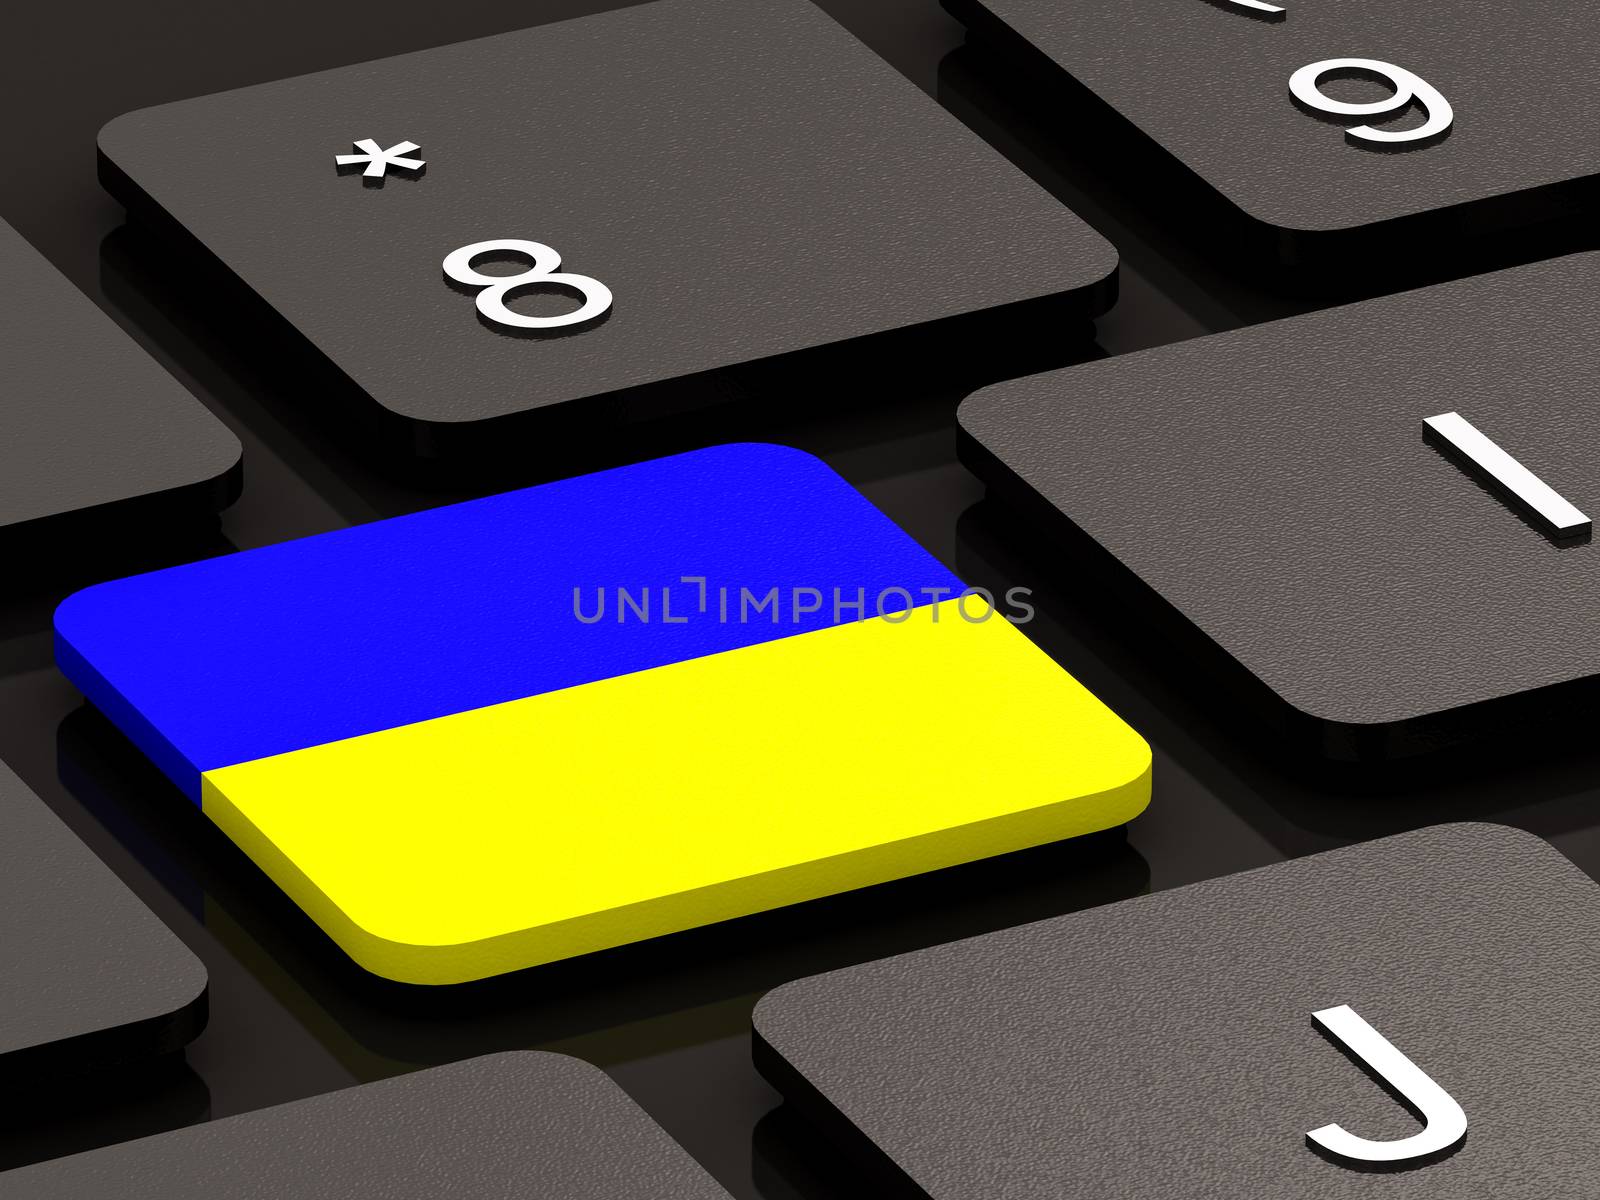 Ukrainian flag on button by Lupen